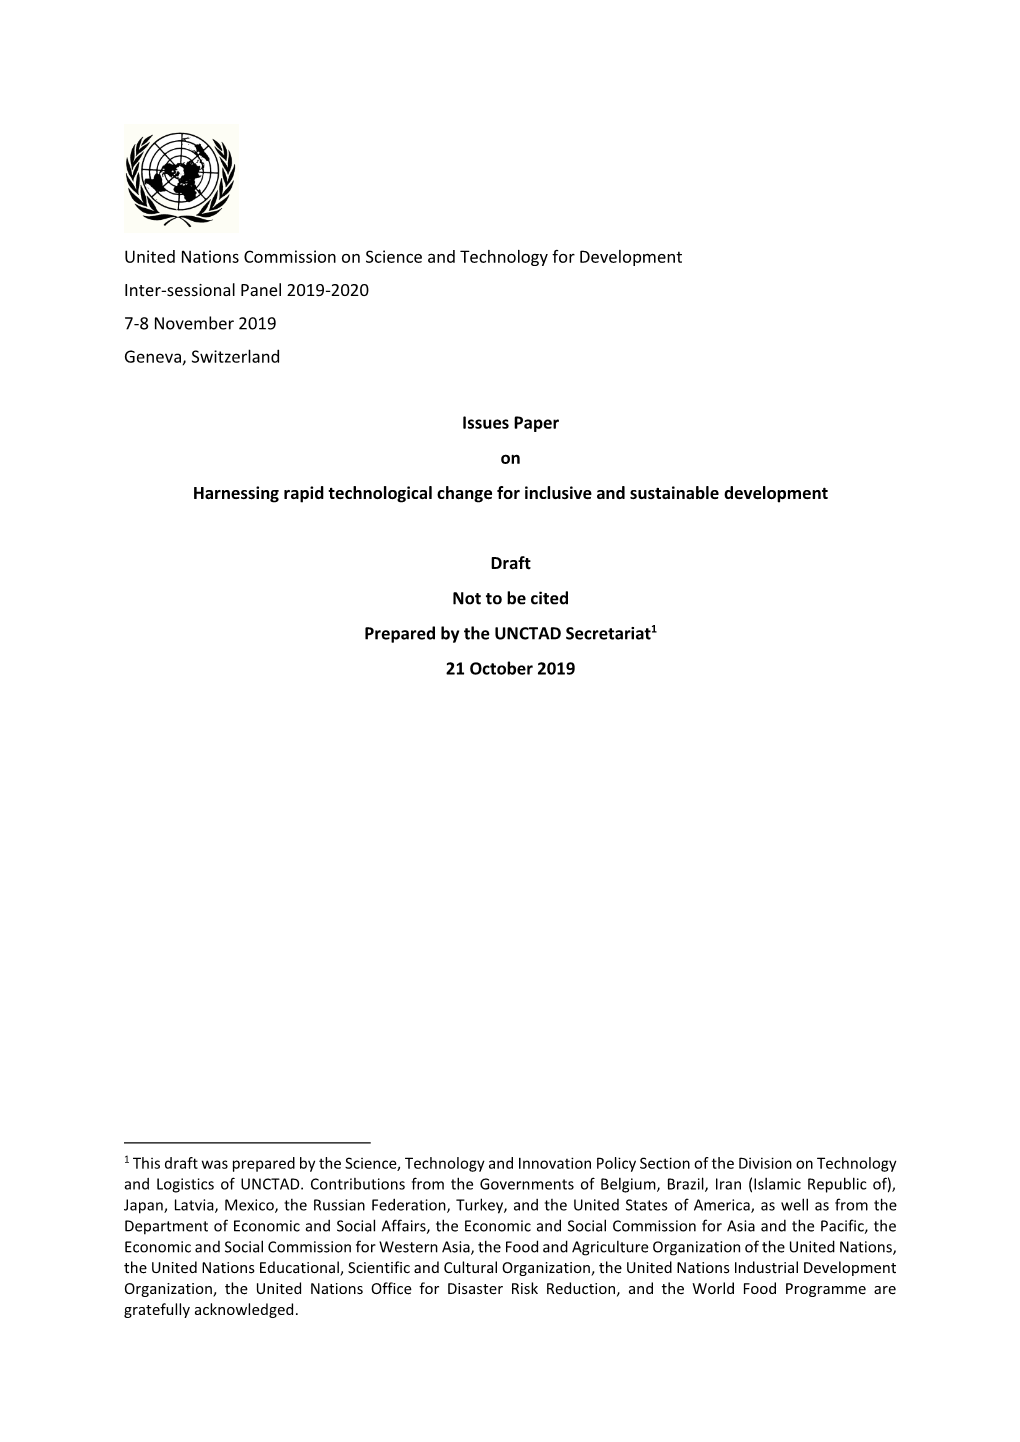 Issues Paper on Harnessing Rapid Technological Change for Inclusive and Sustainable Development